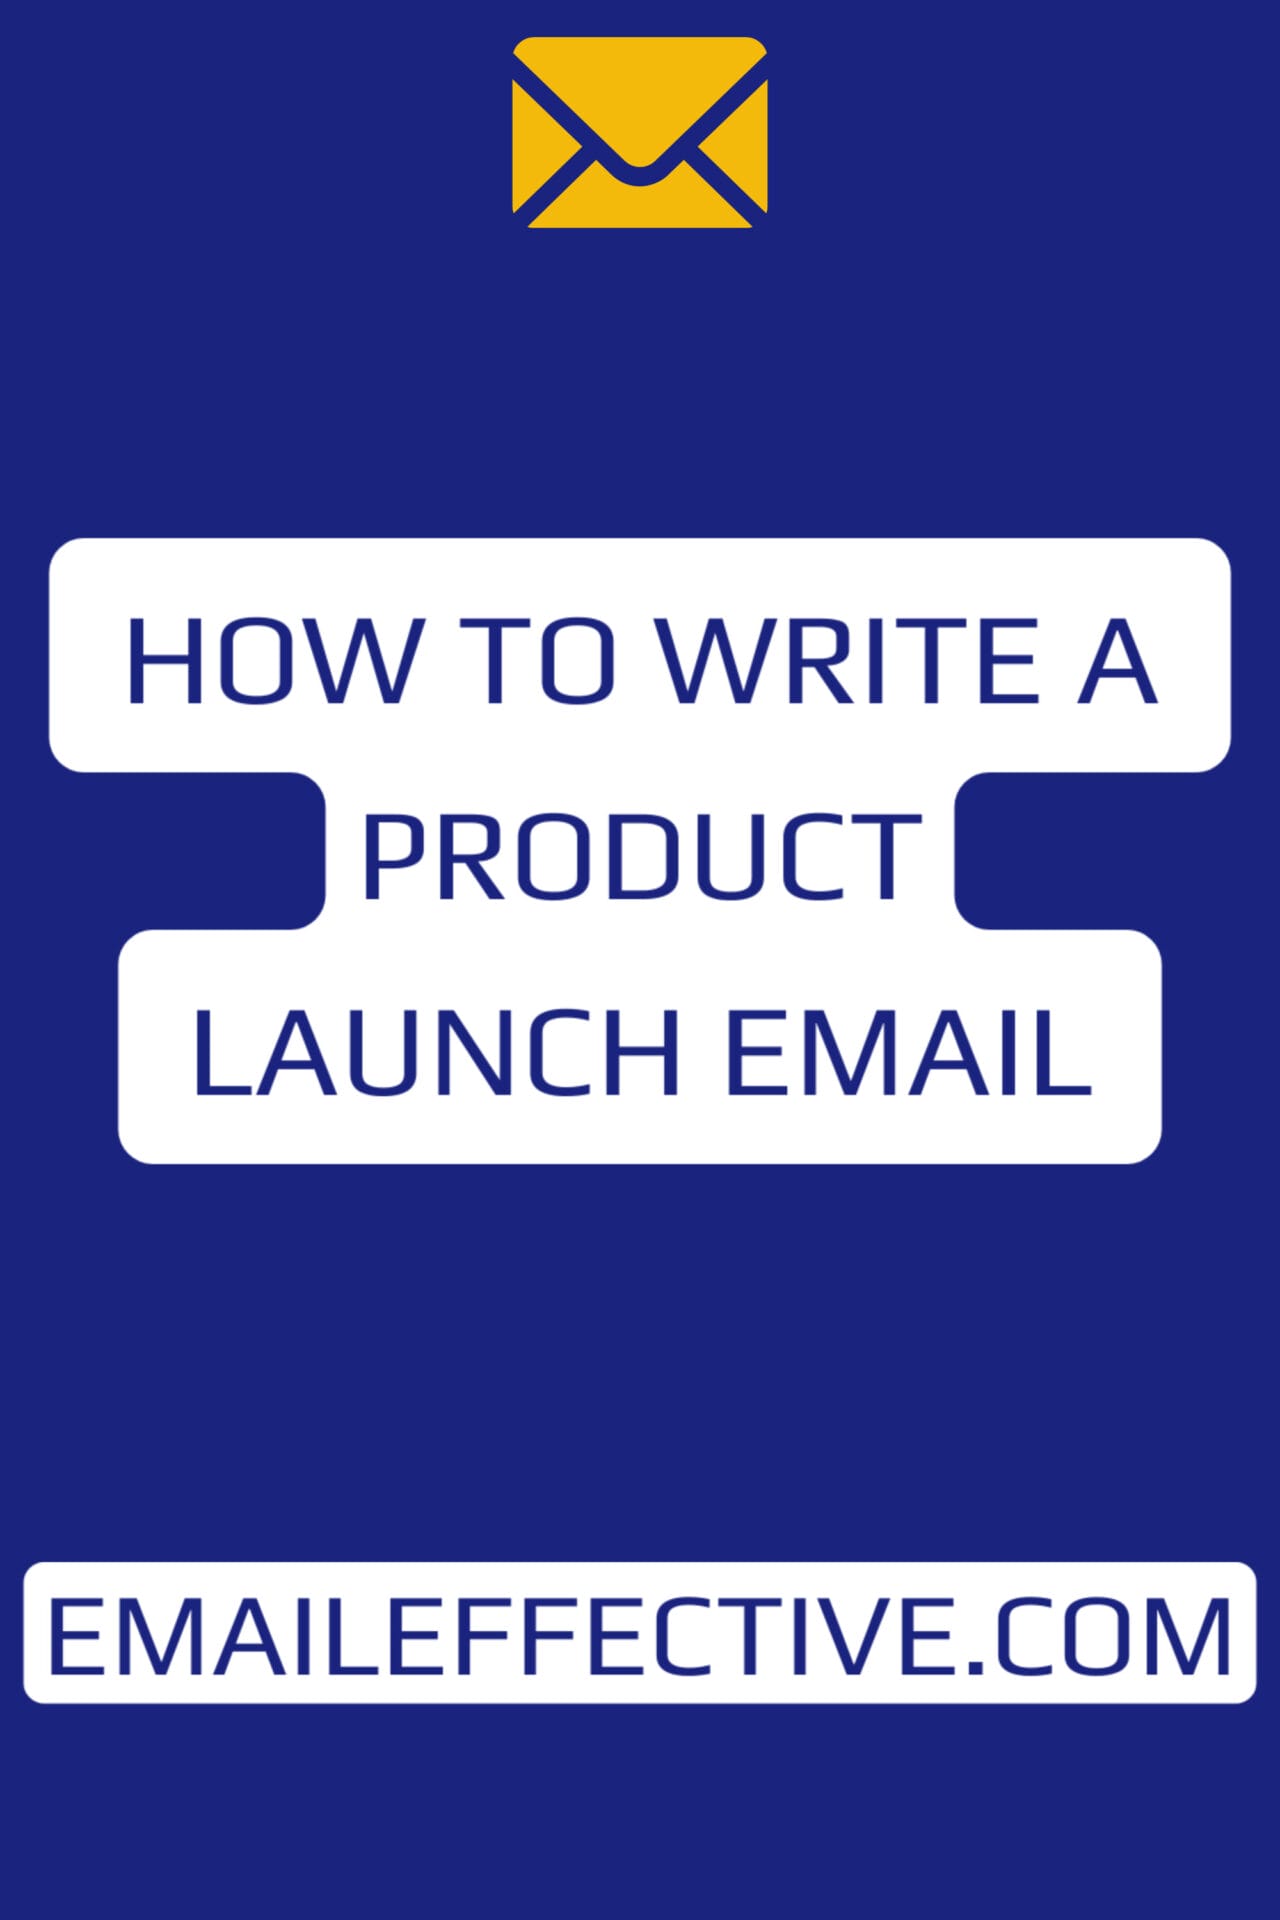 How to Write a Product Launch Email